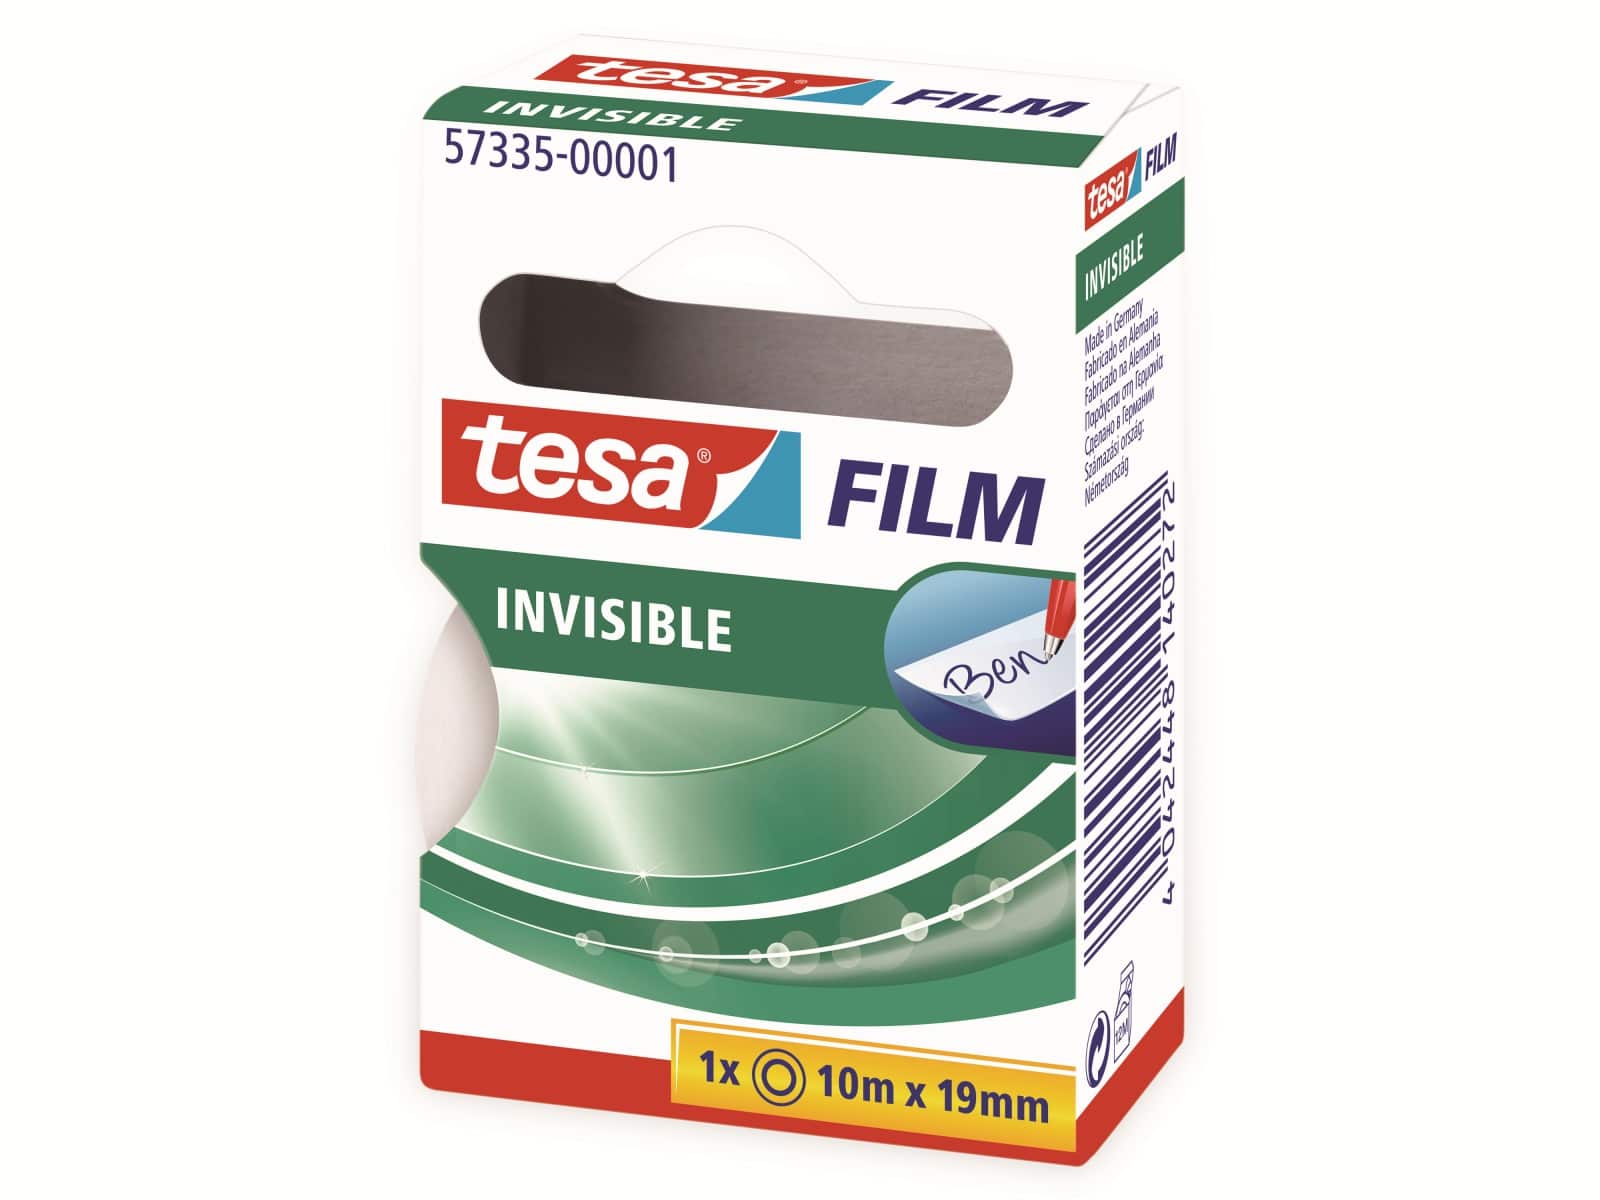 TESA film® invisible, 1 Rolle, 10m:19mm, 57335-00001-01